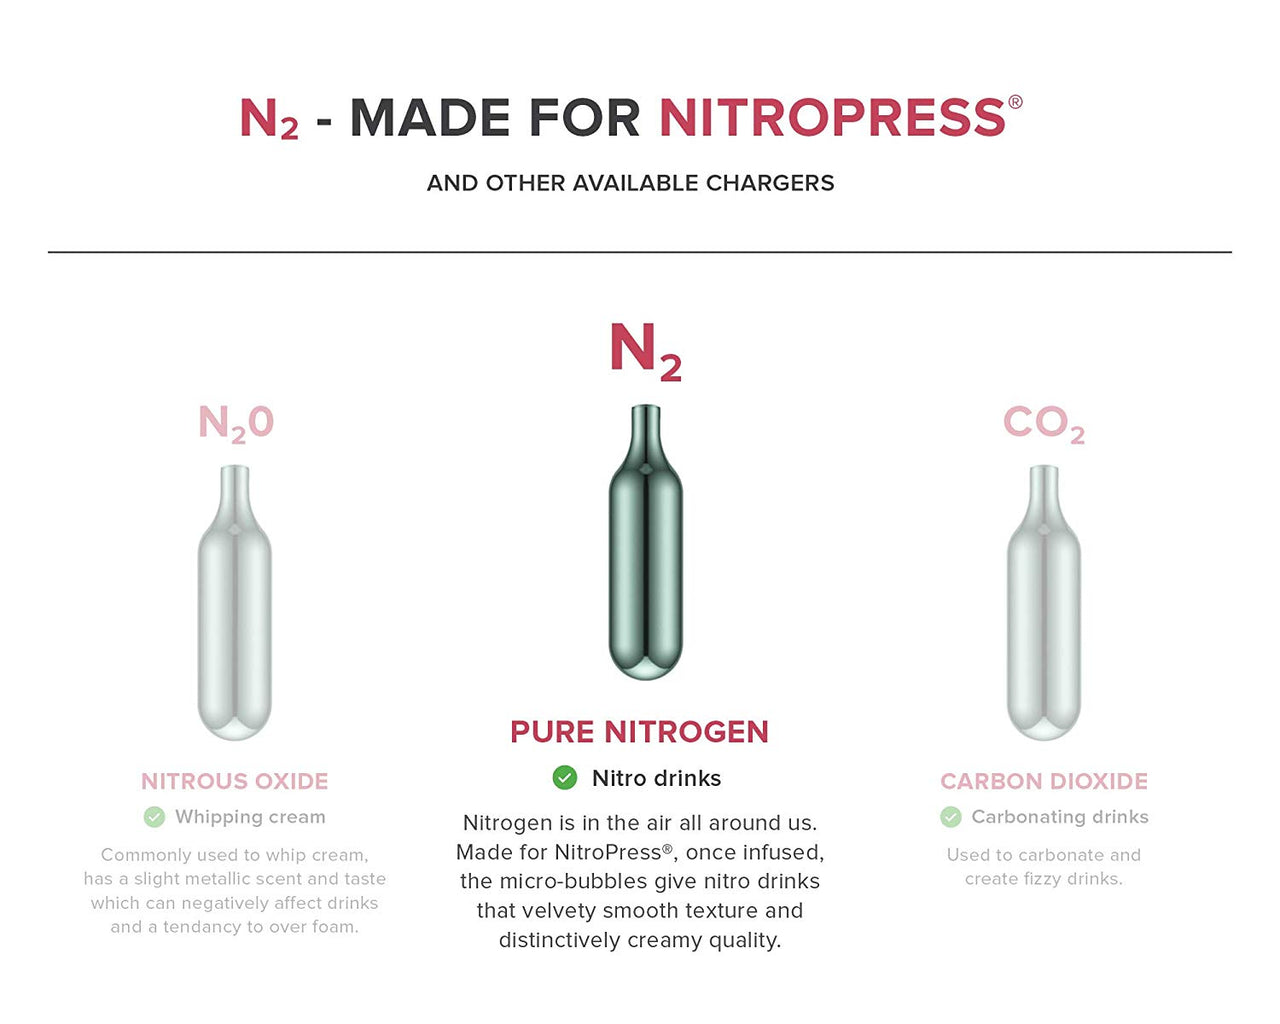 Infographic comparing different culinary gas chargers